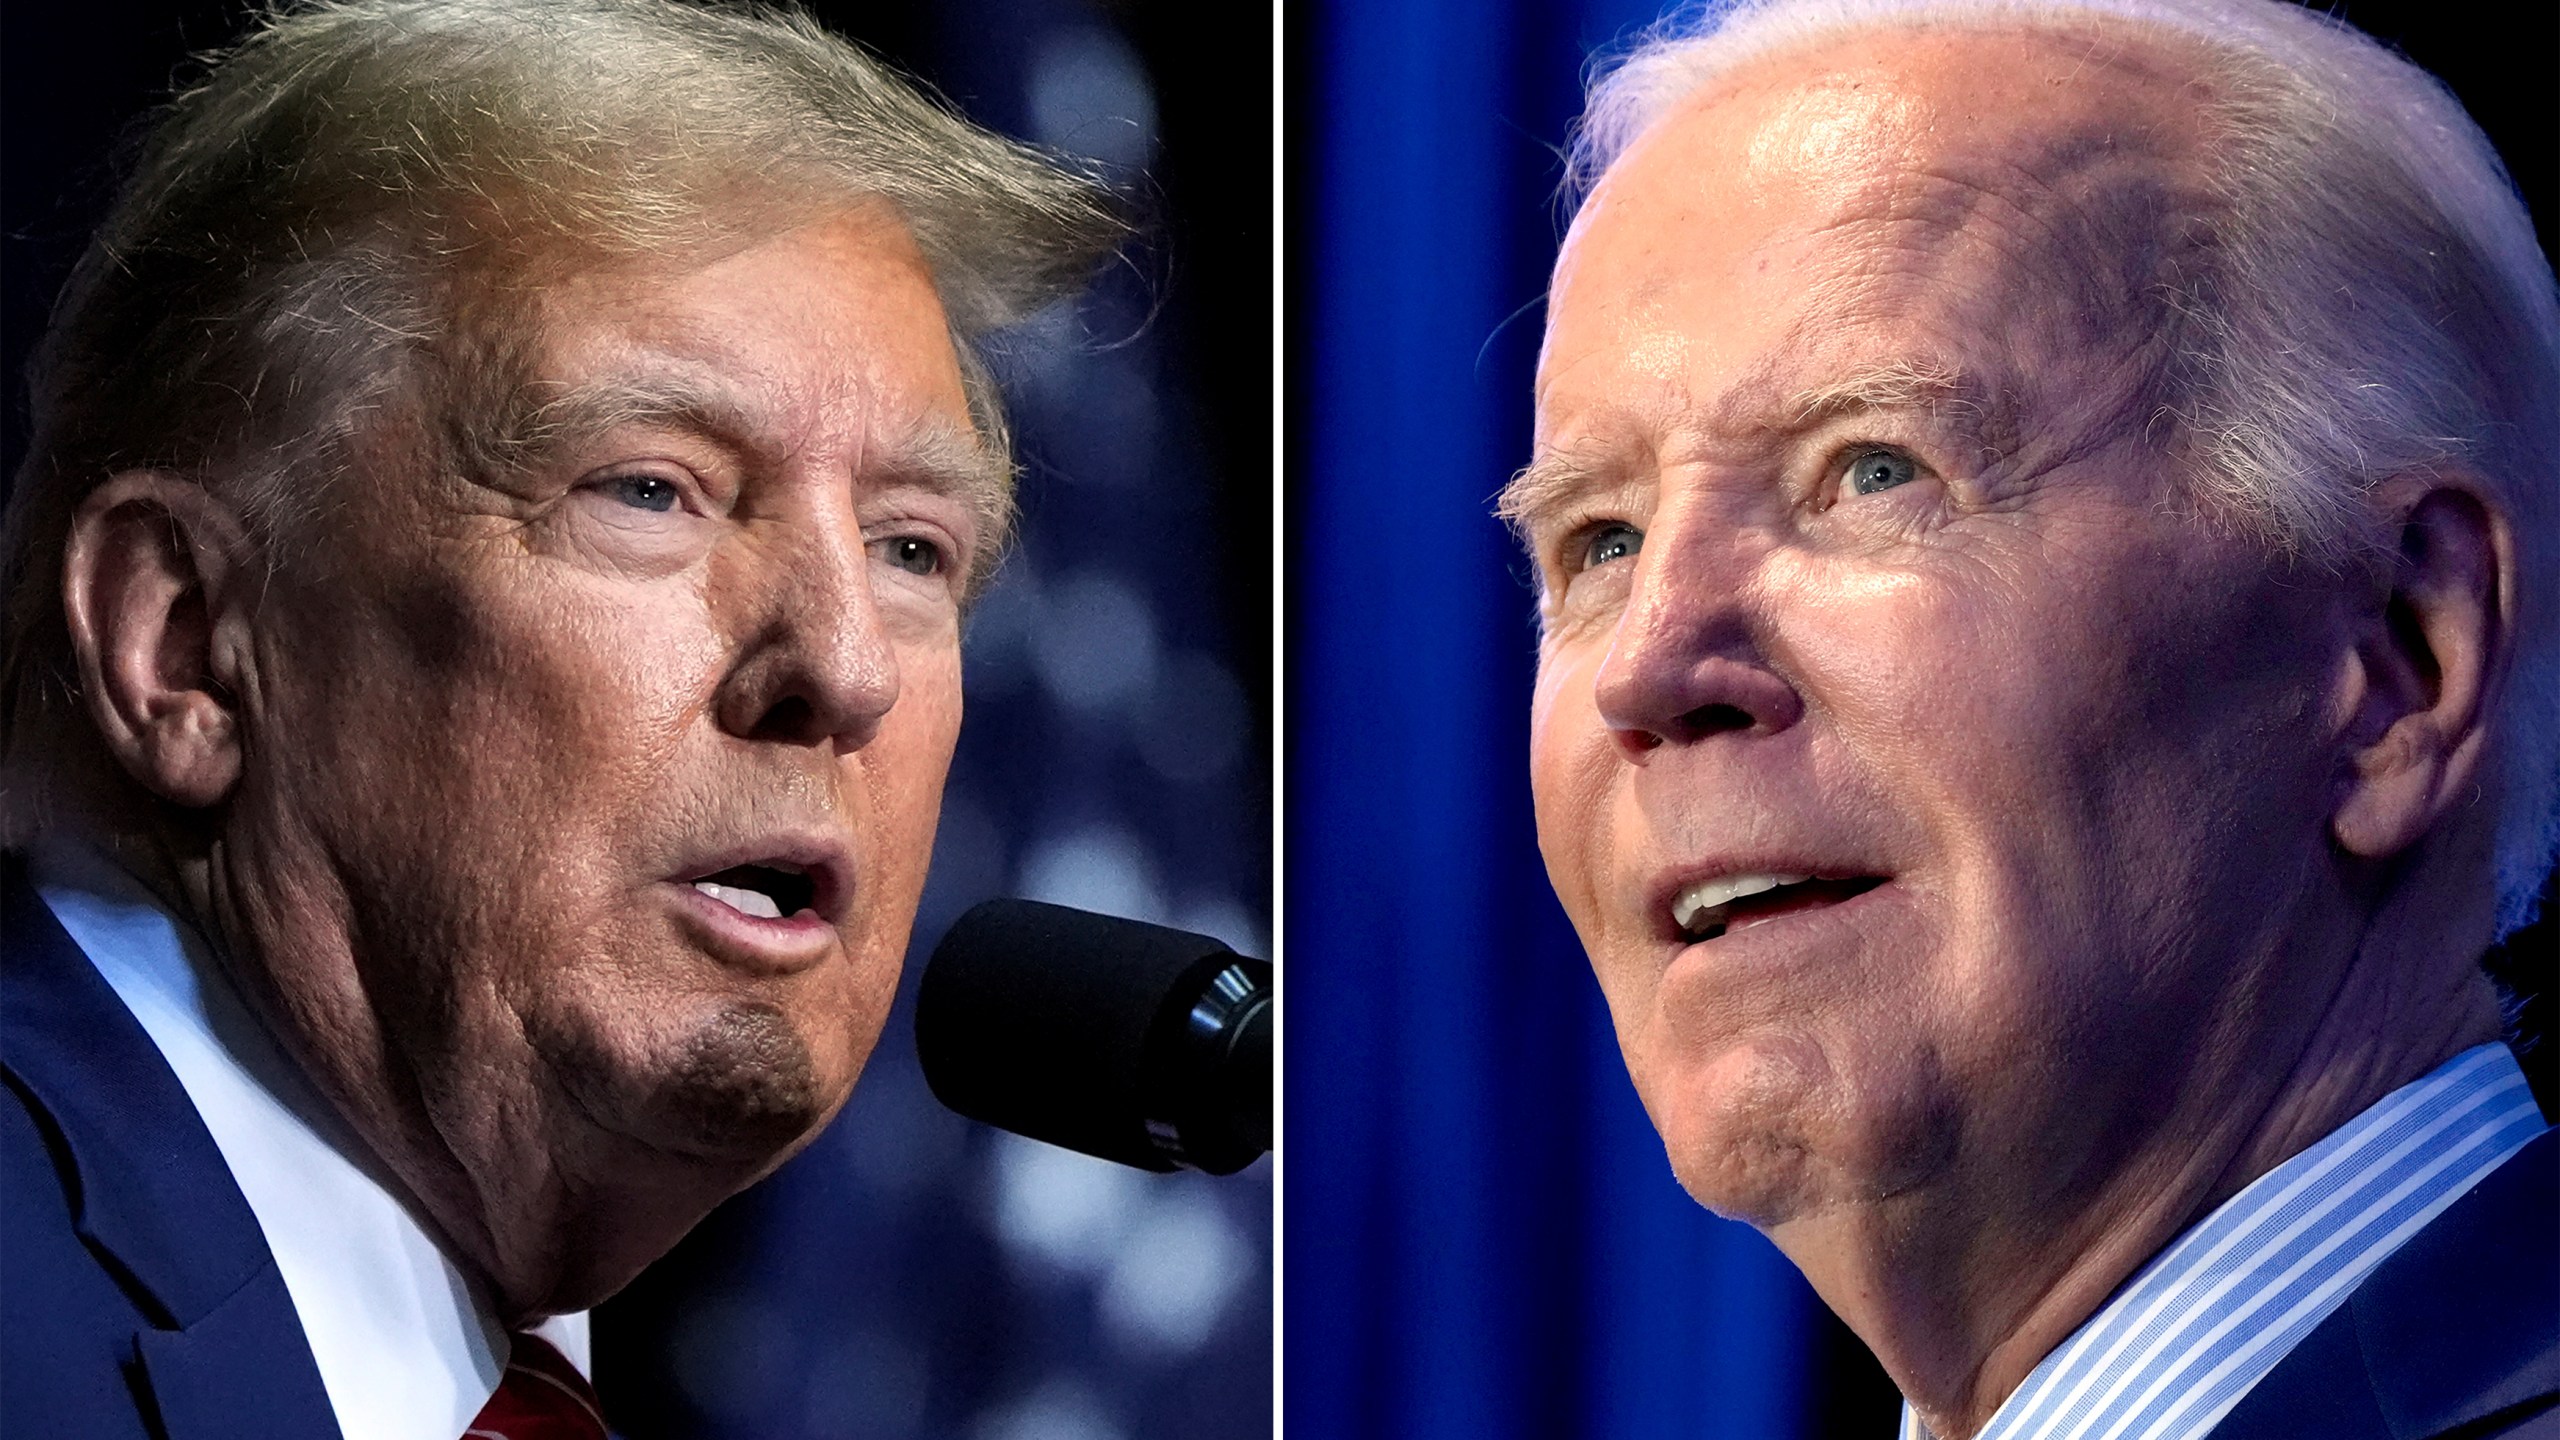 FILE - This combo image shows Republican presidential candidate former President Donald Trump, left, March 9, 2024 and President Joe Biden, right, Jan. 27, 2024. Many Americans are unenthusiastic about a November rematch of the 2020 presidential election. But presumptive GOP nominee Donald Trump appears to stoke more fear and anger among voters from his opposing party than President Joe Biden does from his. That's according to a new poll from The Associated Press-NORC Center for Public Affairs Research. (AP Photo, File)